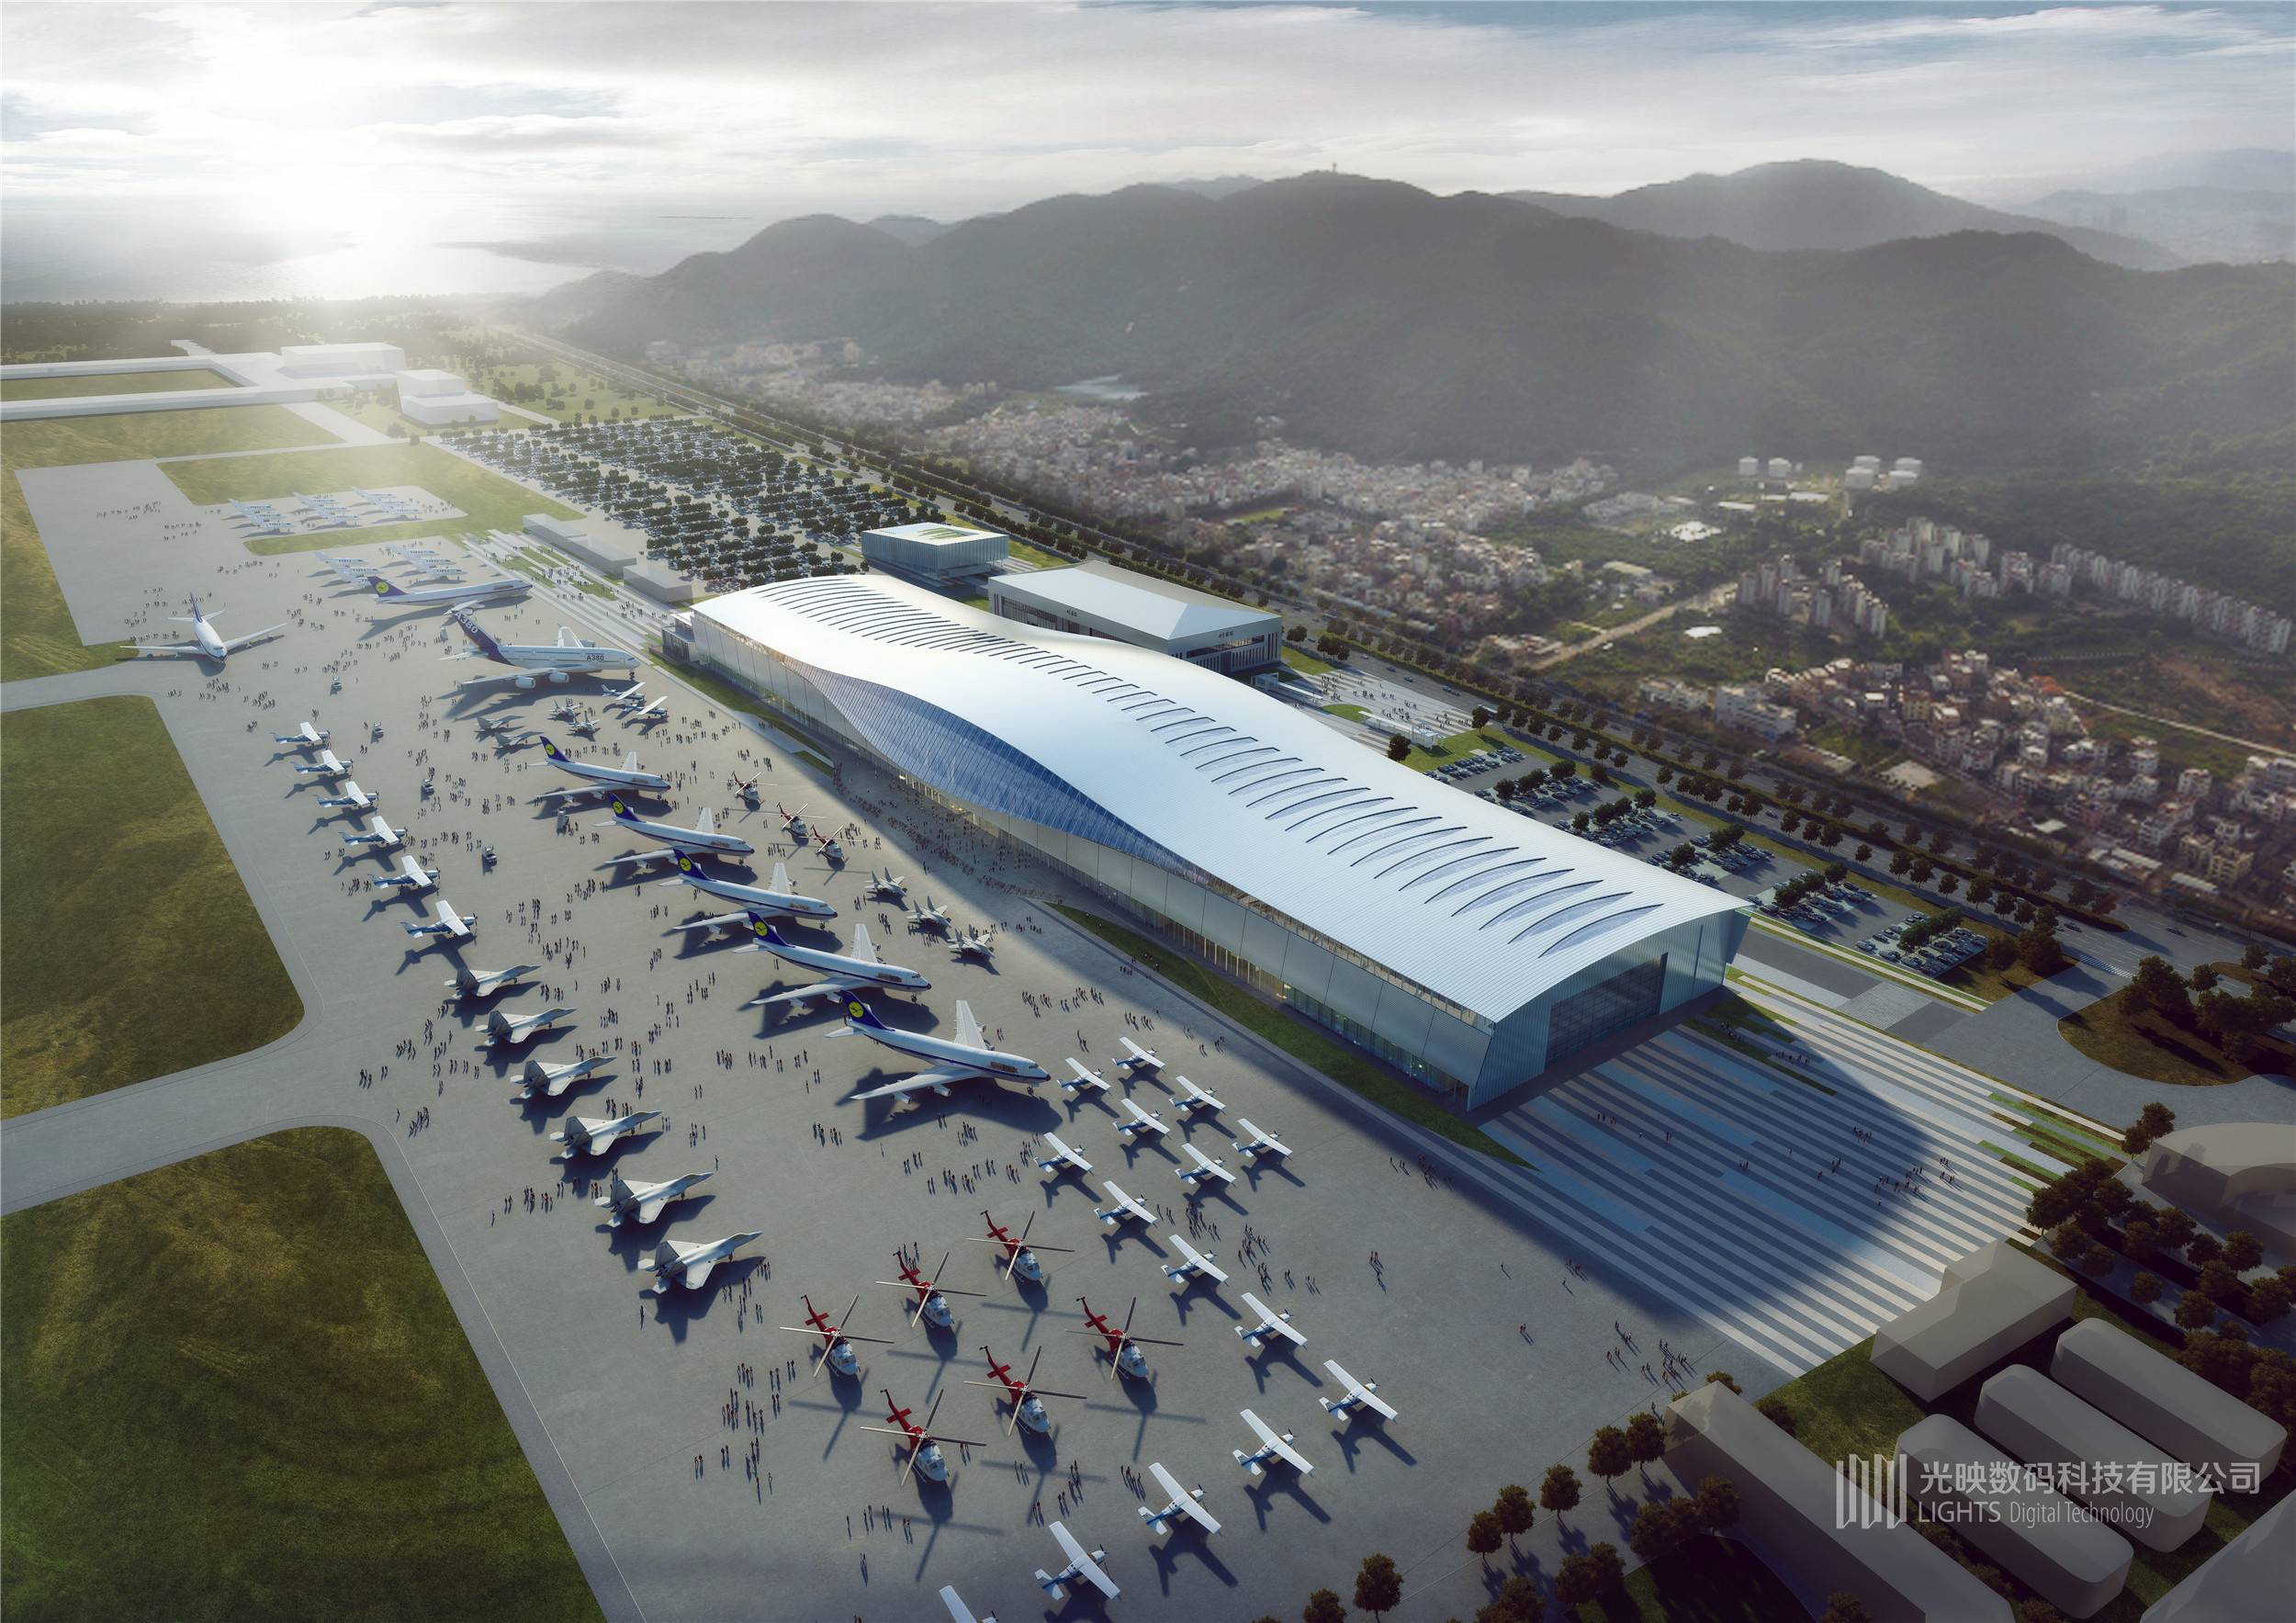 Rendered Elevations Architecture - Zhuhai Airshow – Lights CG